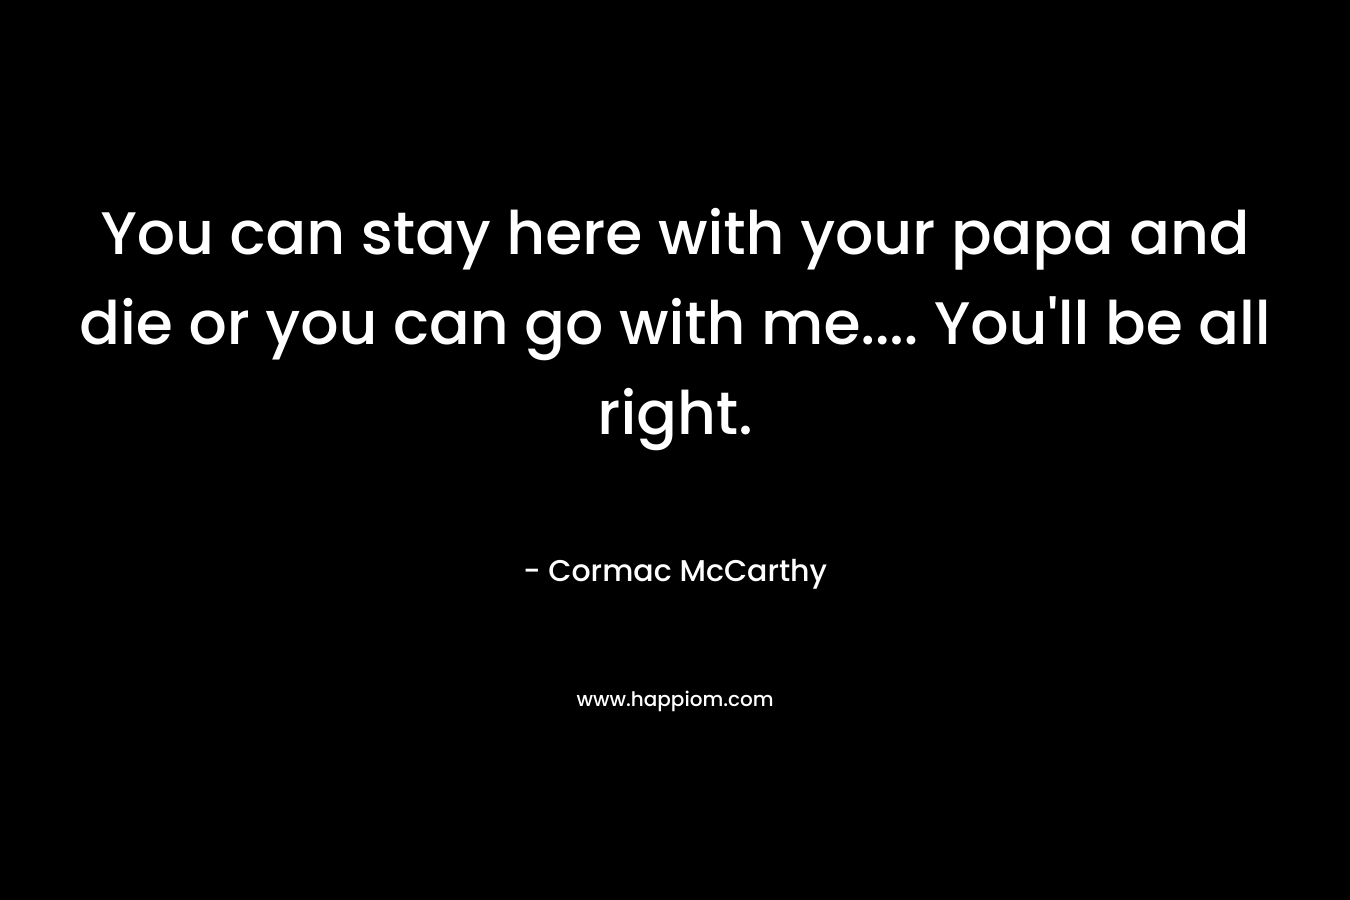 You can stay here with your papa and die or you can go with me…. You’ll be all right. – Cormac McCarthy